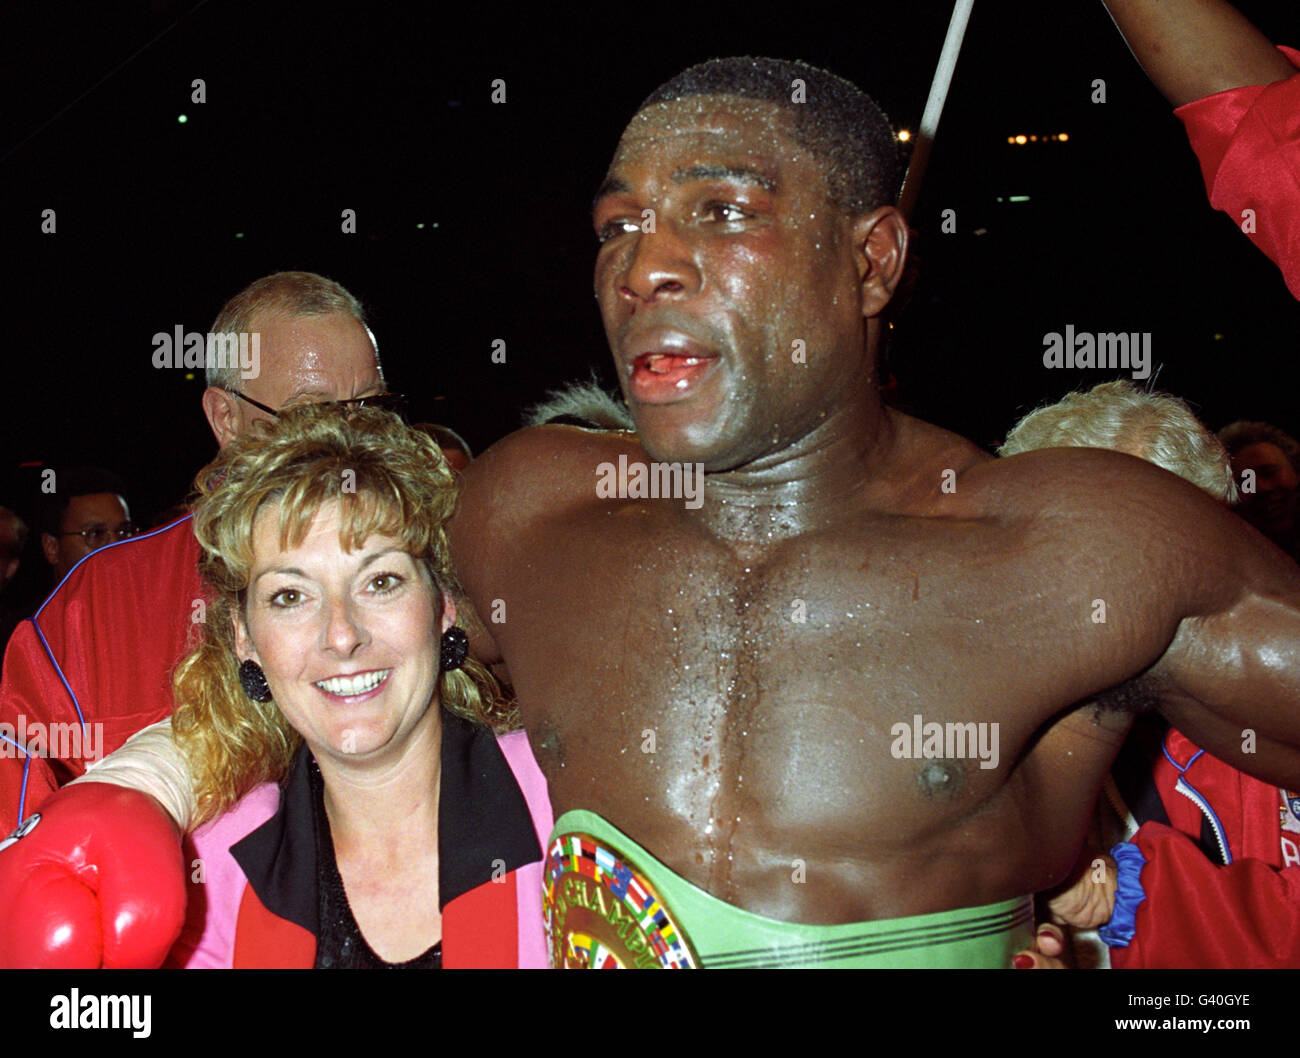 Frank Bruno is congratulated by his wife Laura after beating Oliver McCall to win the WBC Heavyweight Championship at Wembley Stadium on 2.9.95. 20/01/97: British sports stars are feared to have become targets of a neo-Nazi letter bomb campaign. Bruno, swimmer Sharron Davies and footballer Paul Ince all in mixed-race marriages were reported to have been alerted over the Danish plot. Laura, wife of boxing hero Frank won a court order banning him from assaulting her, it was reported on 3.9.95. Laura Bruno, 34, is said to have got the High Court order after what friends described as a 'series of Stock Photo